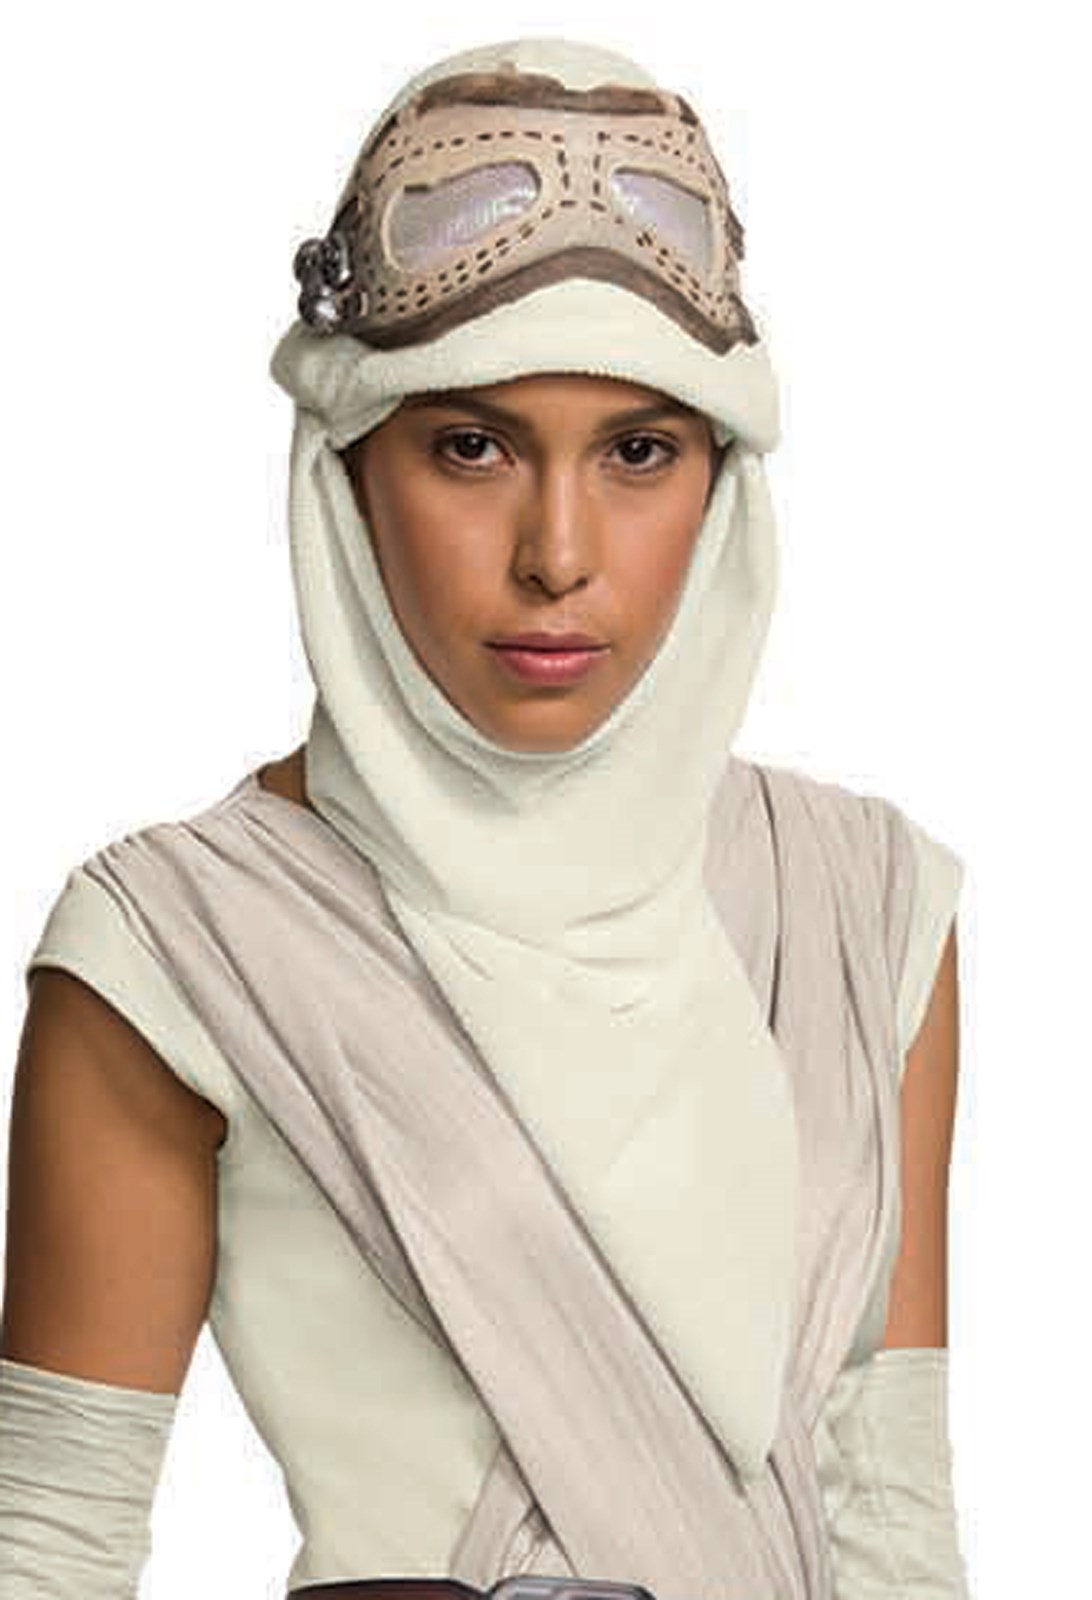 Star Wars:  The Force Awakens – Rey Adult Eye Mask with Hood